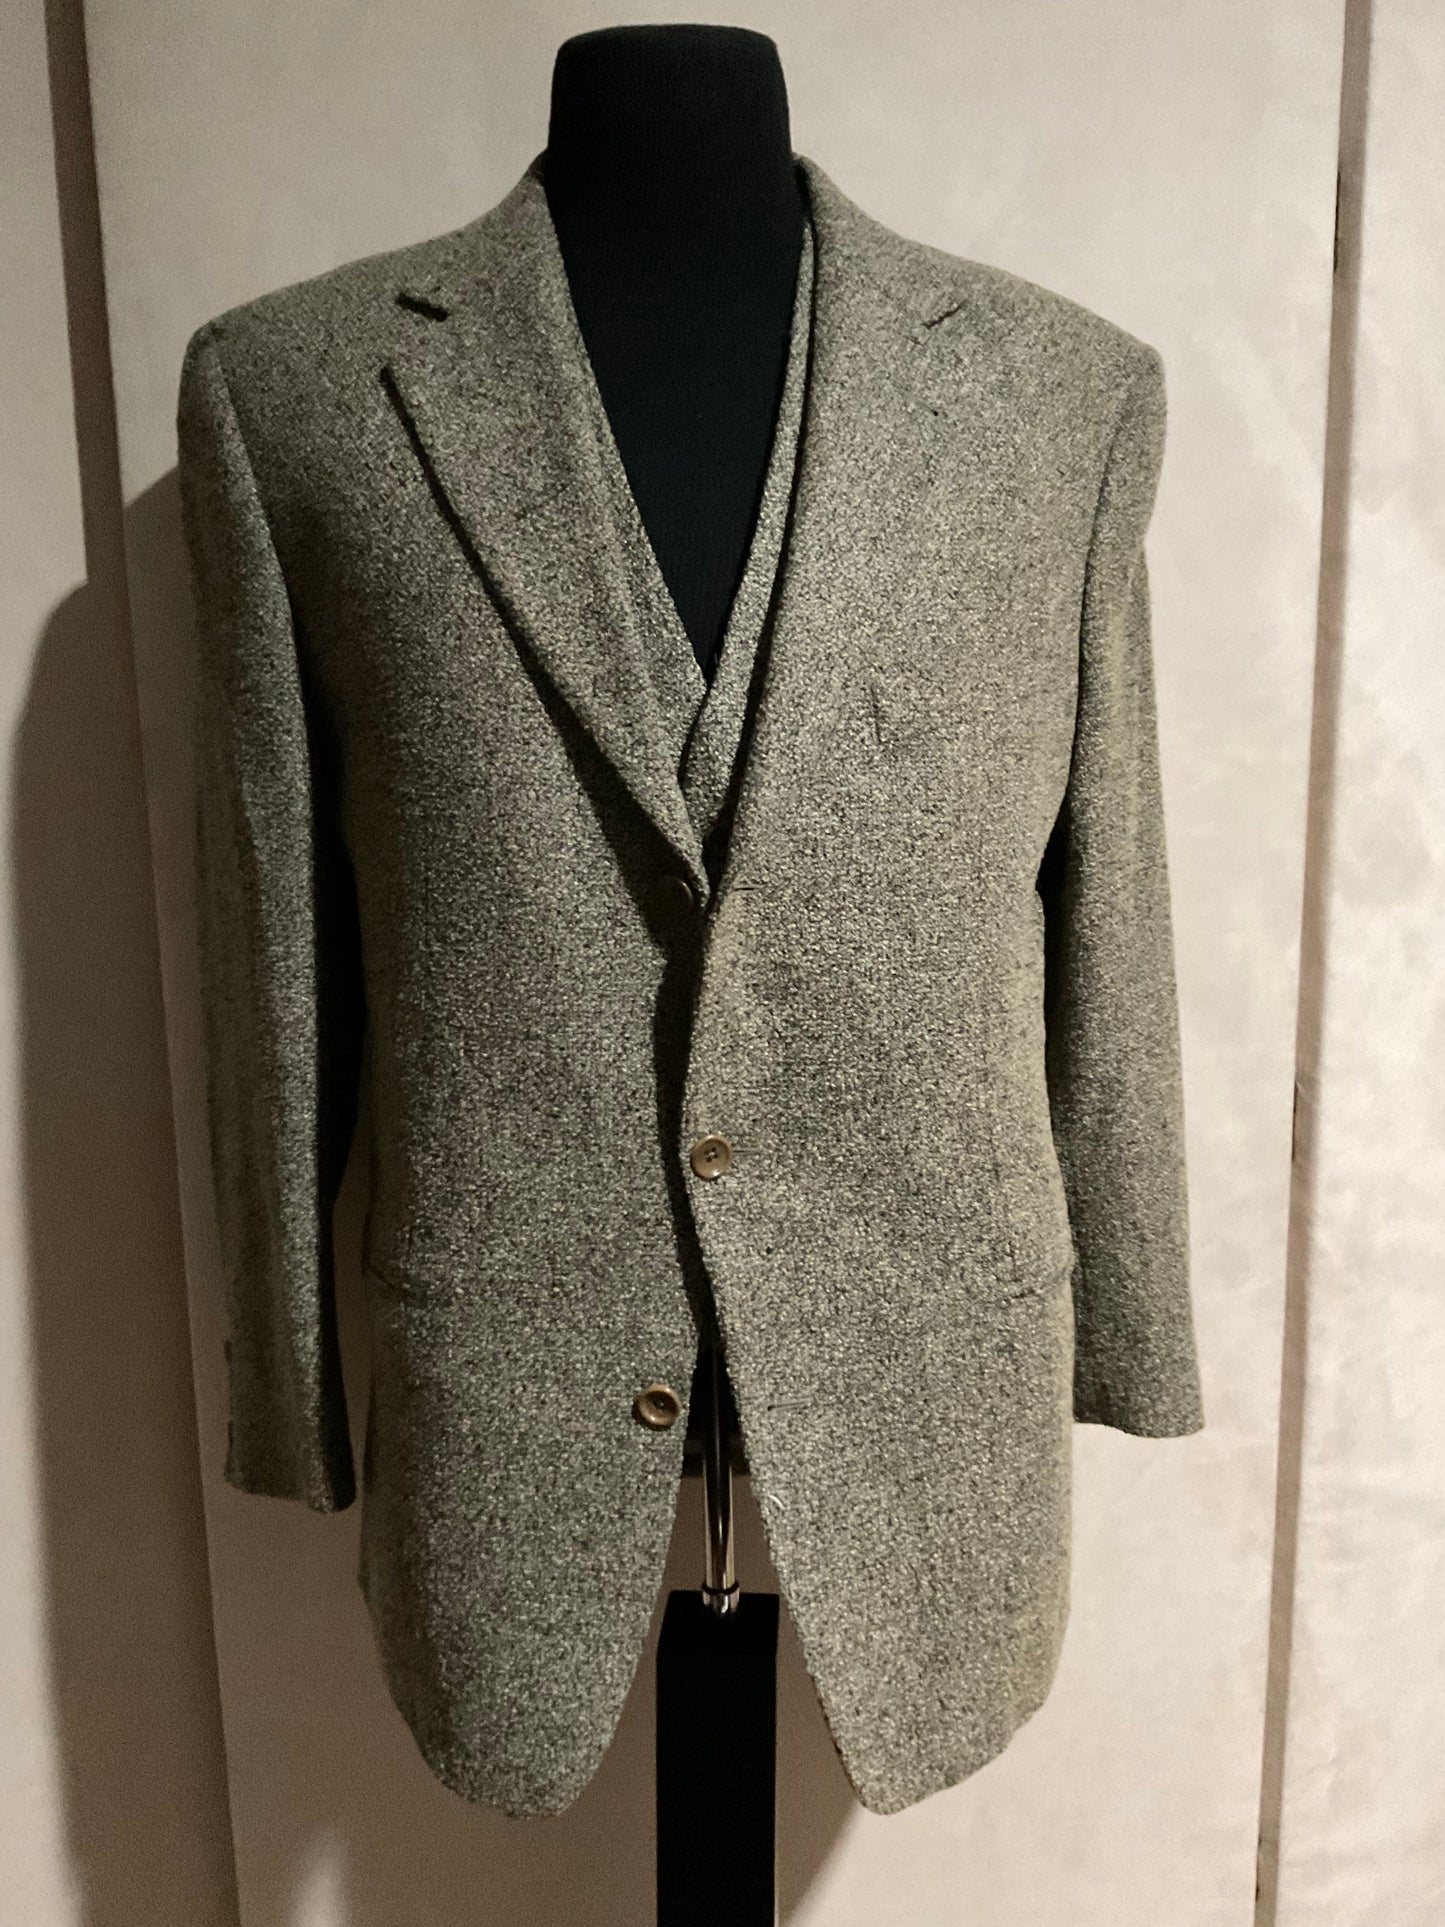 R P SPORT JACKET / BLACK & TAUPE BOUCLÉ / 40 REGULAR / MADE IN ITALY